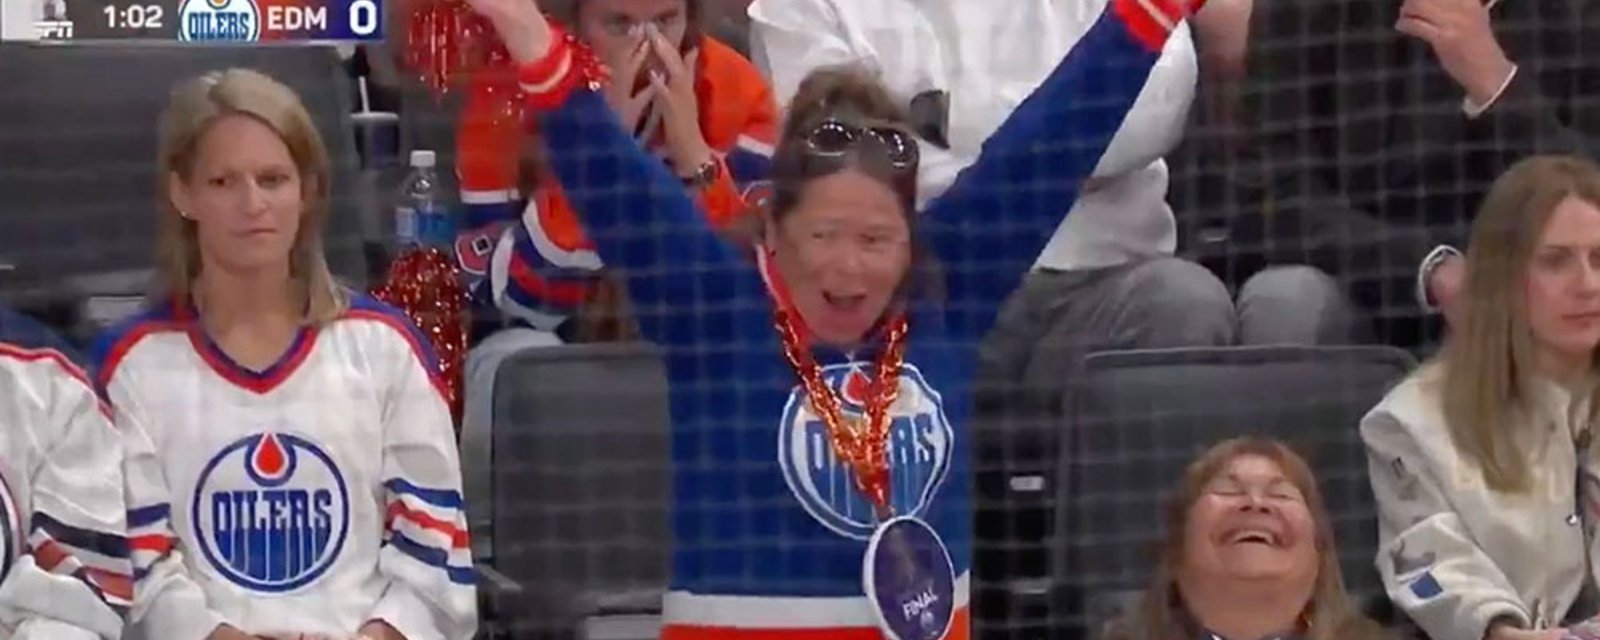 We now know the backstory of another Oilers fan who went viral